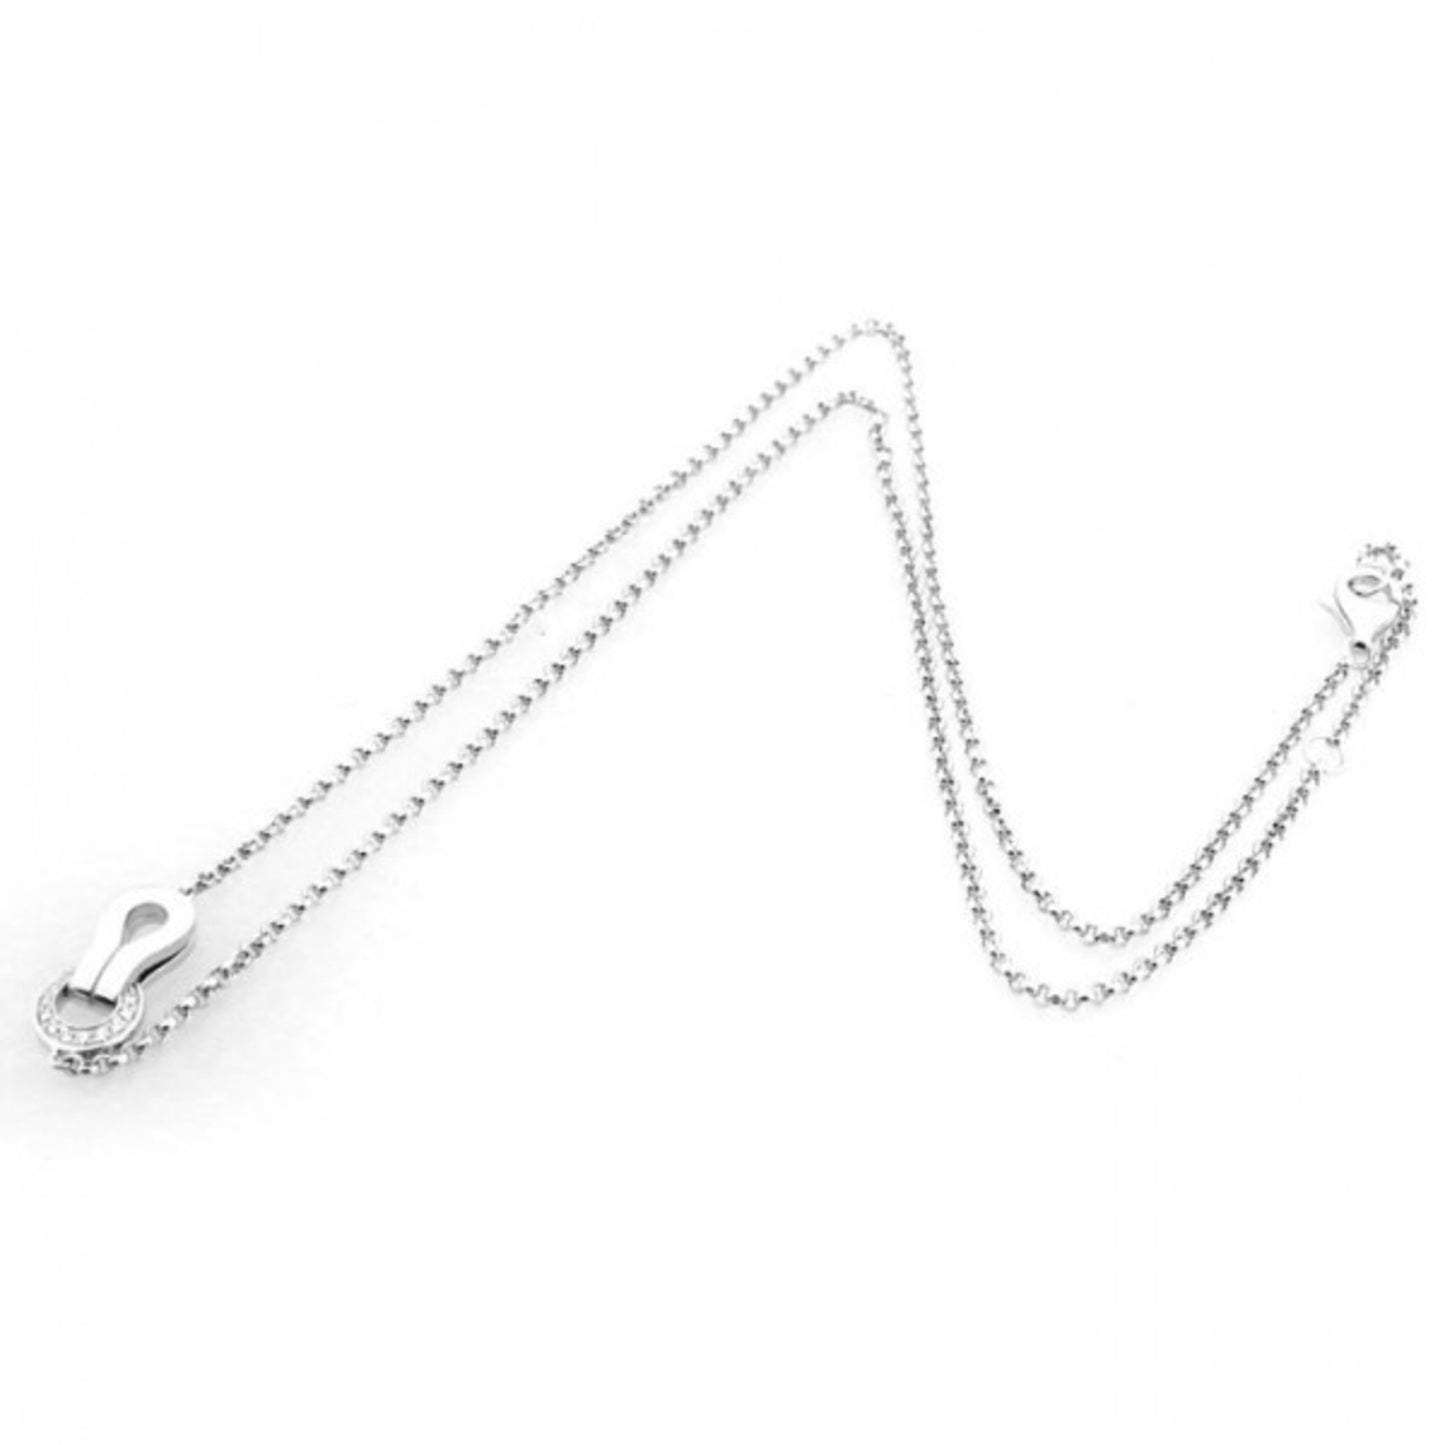 Cartier Women's White Gold Diamond Necklace by Cartier in White